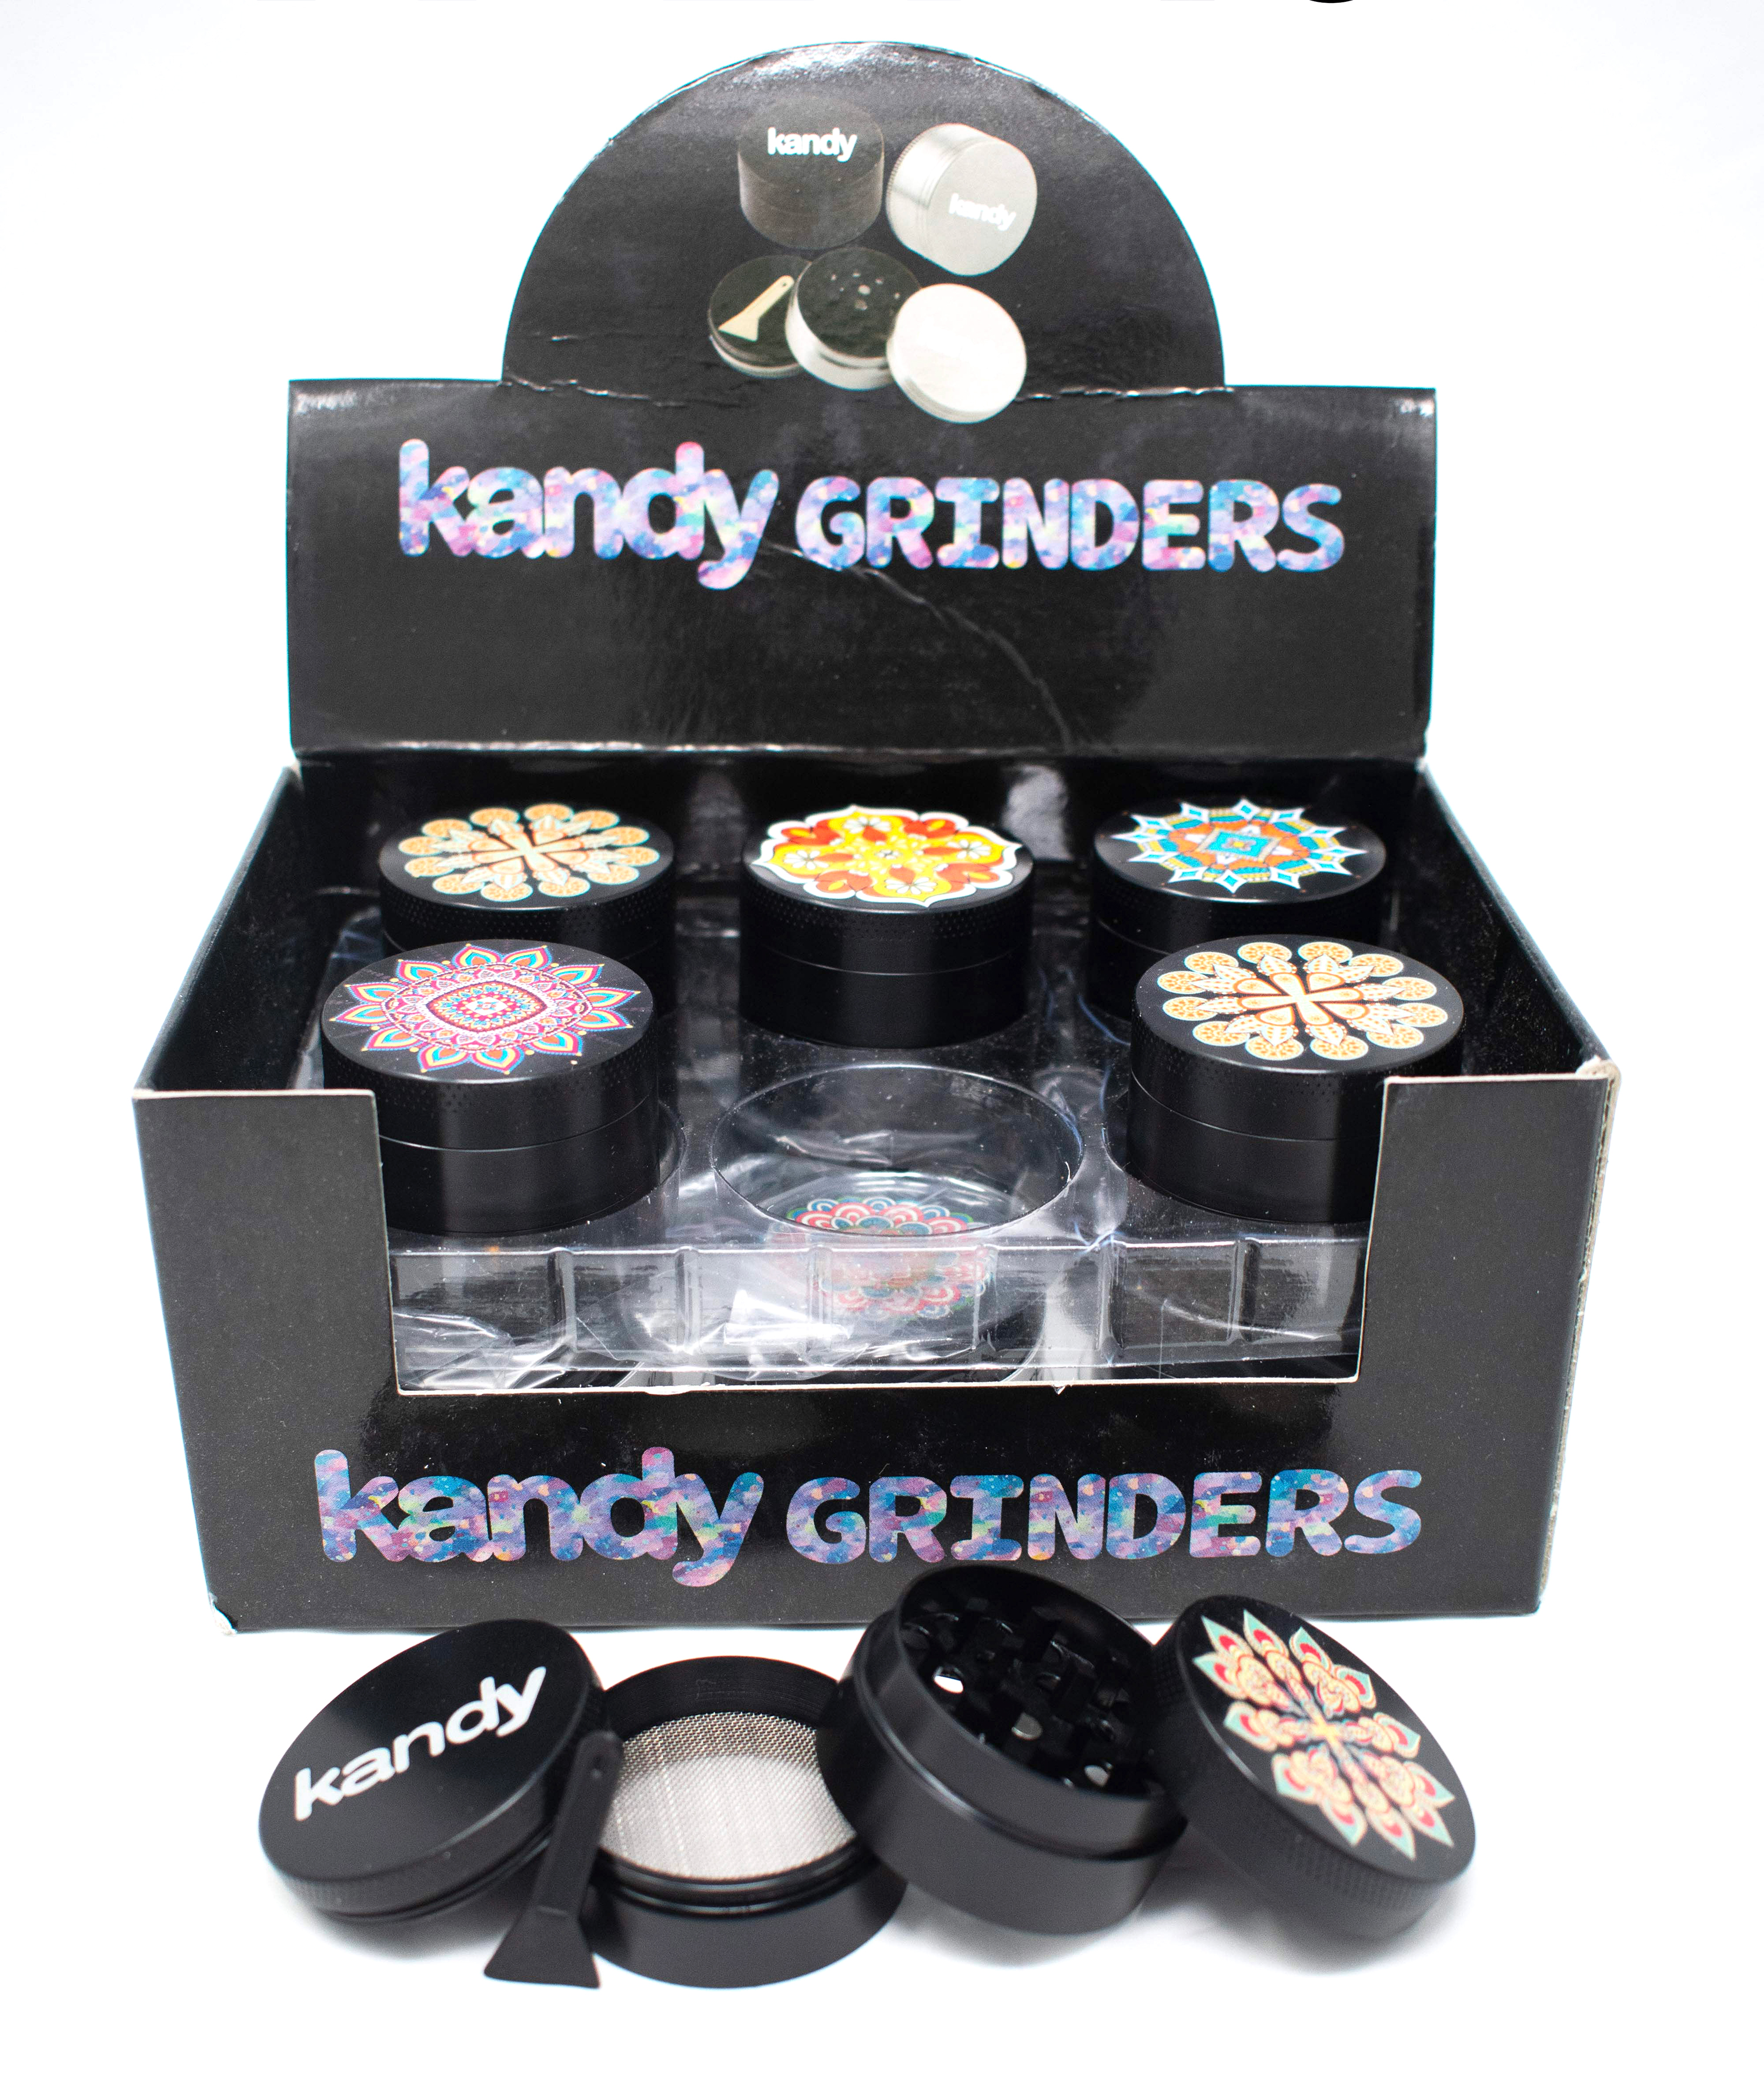 Grinder Kandy Zinc Alloy Colorful Printed Design On The Top 40mm 4Pts